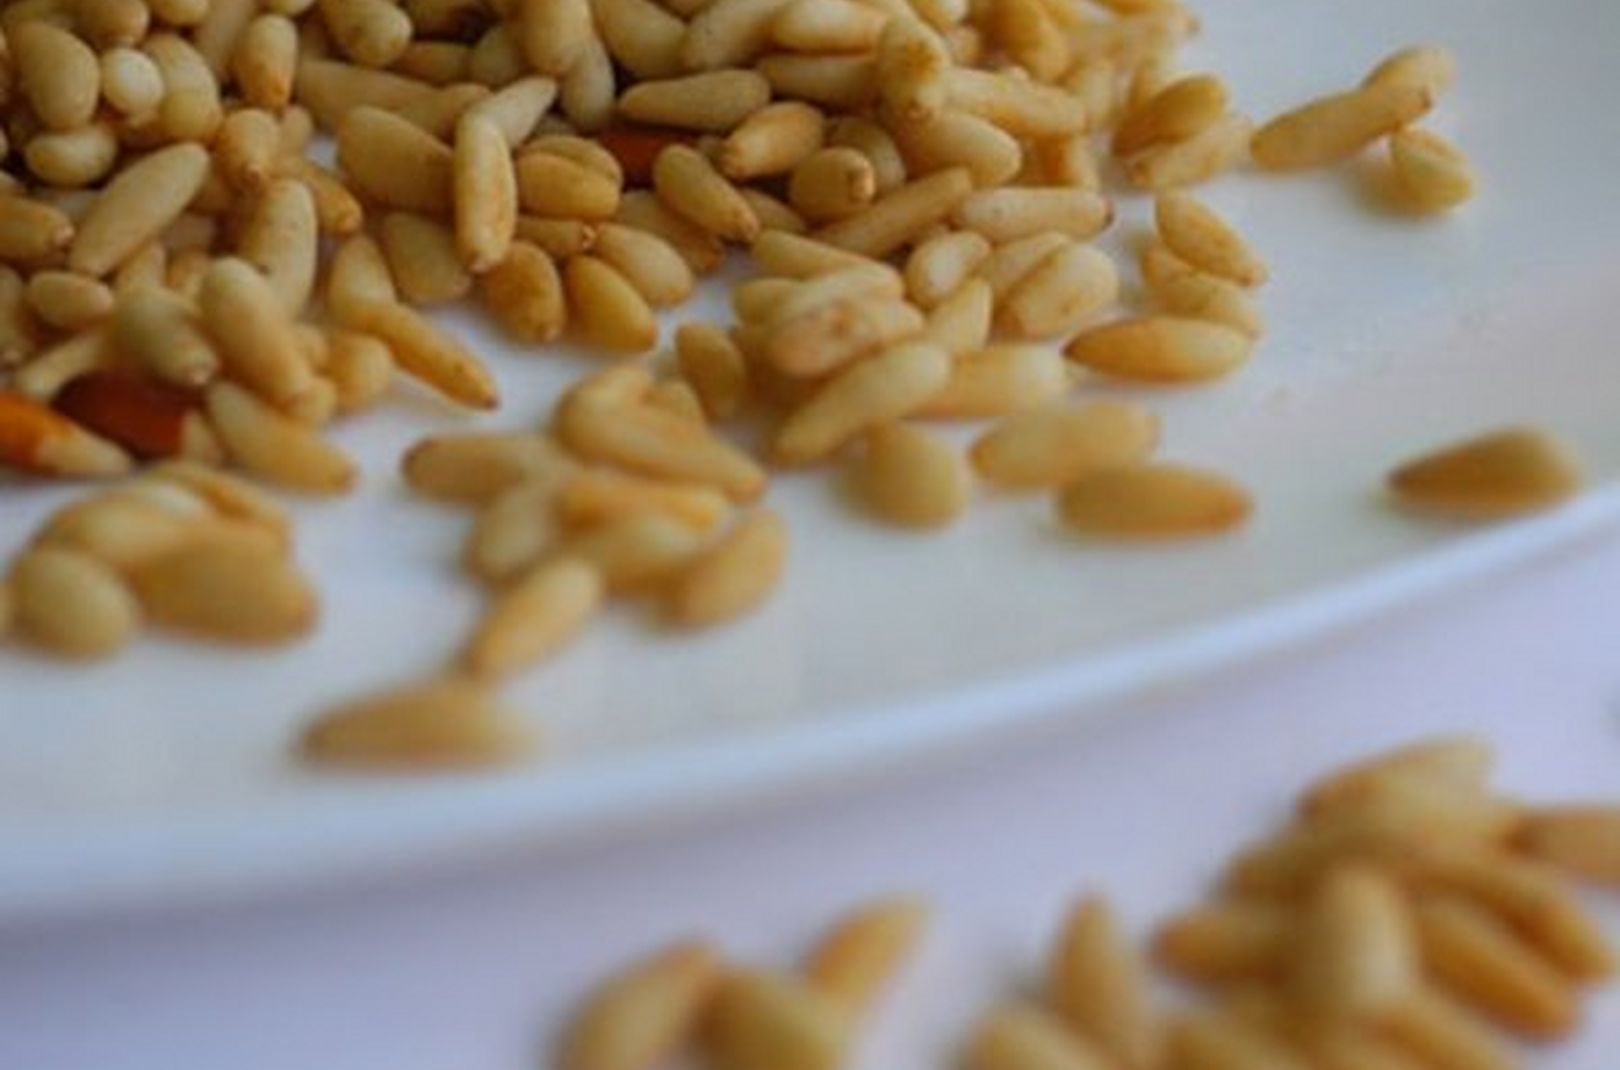 A bowl of pine nuts